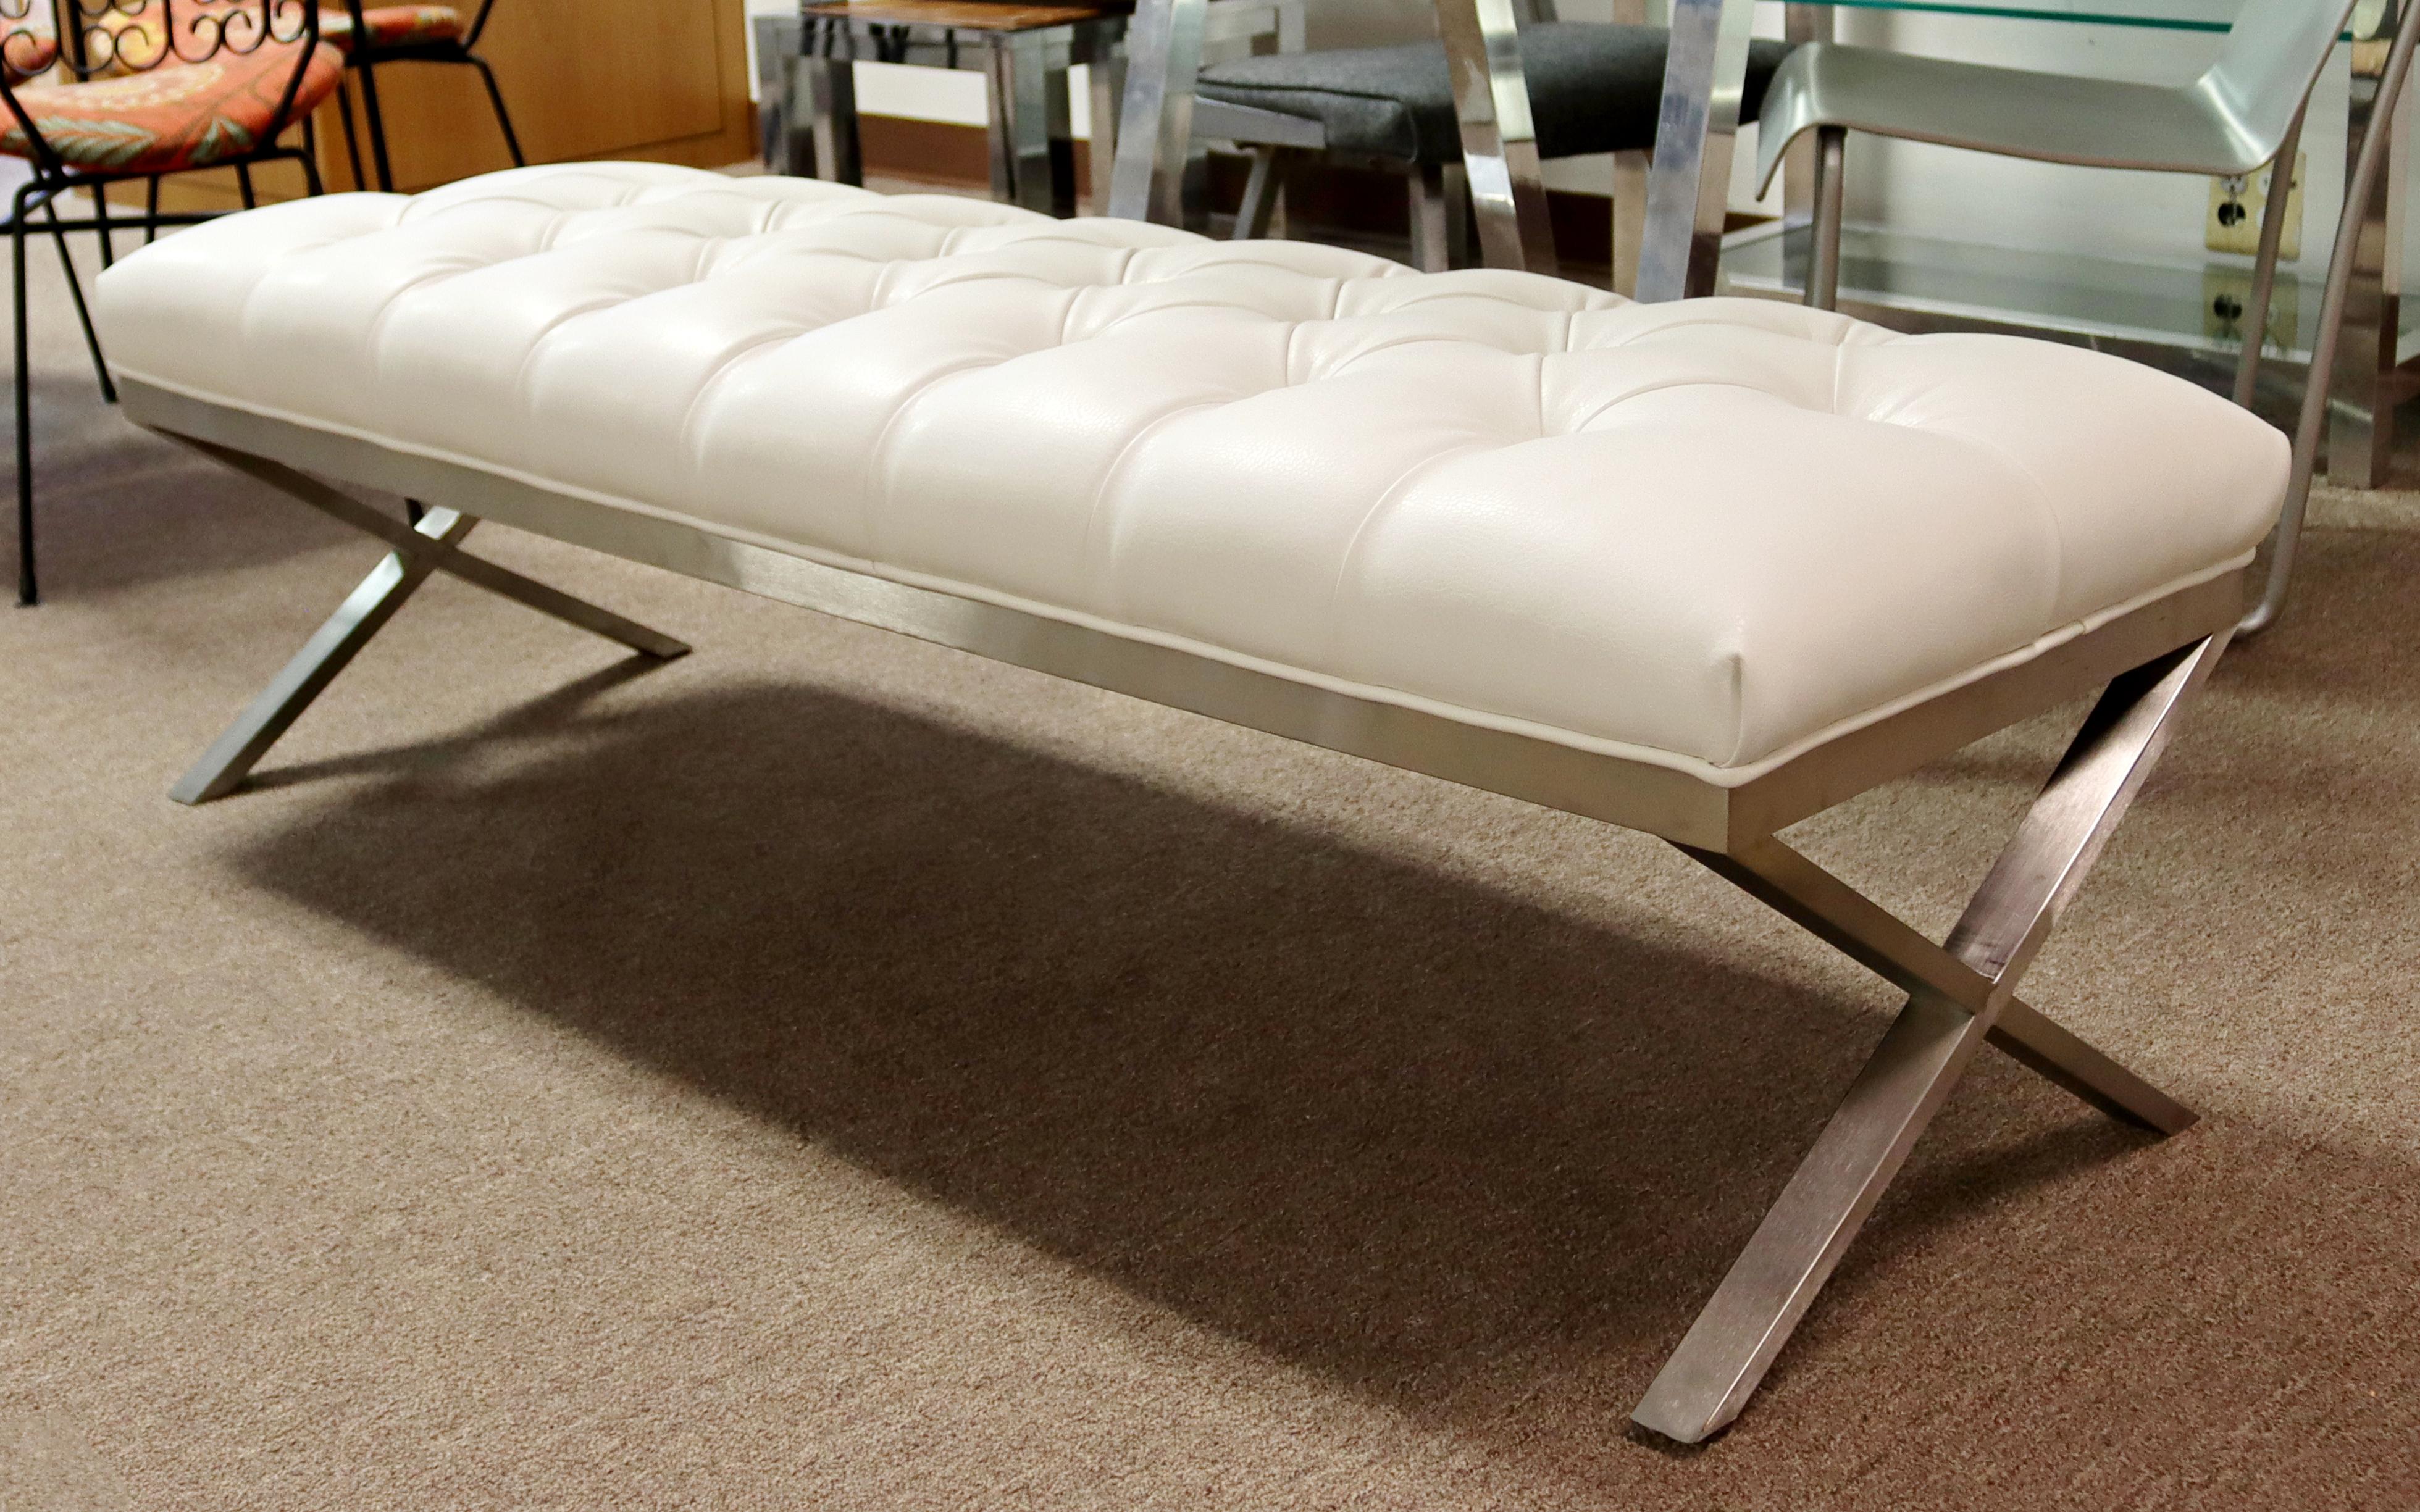 For your consideration is a terrific, tufted vinyl bench, on a chrome base. In excellent condition. The dimensions are 59